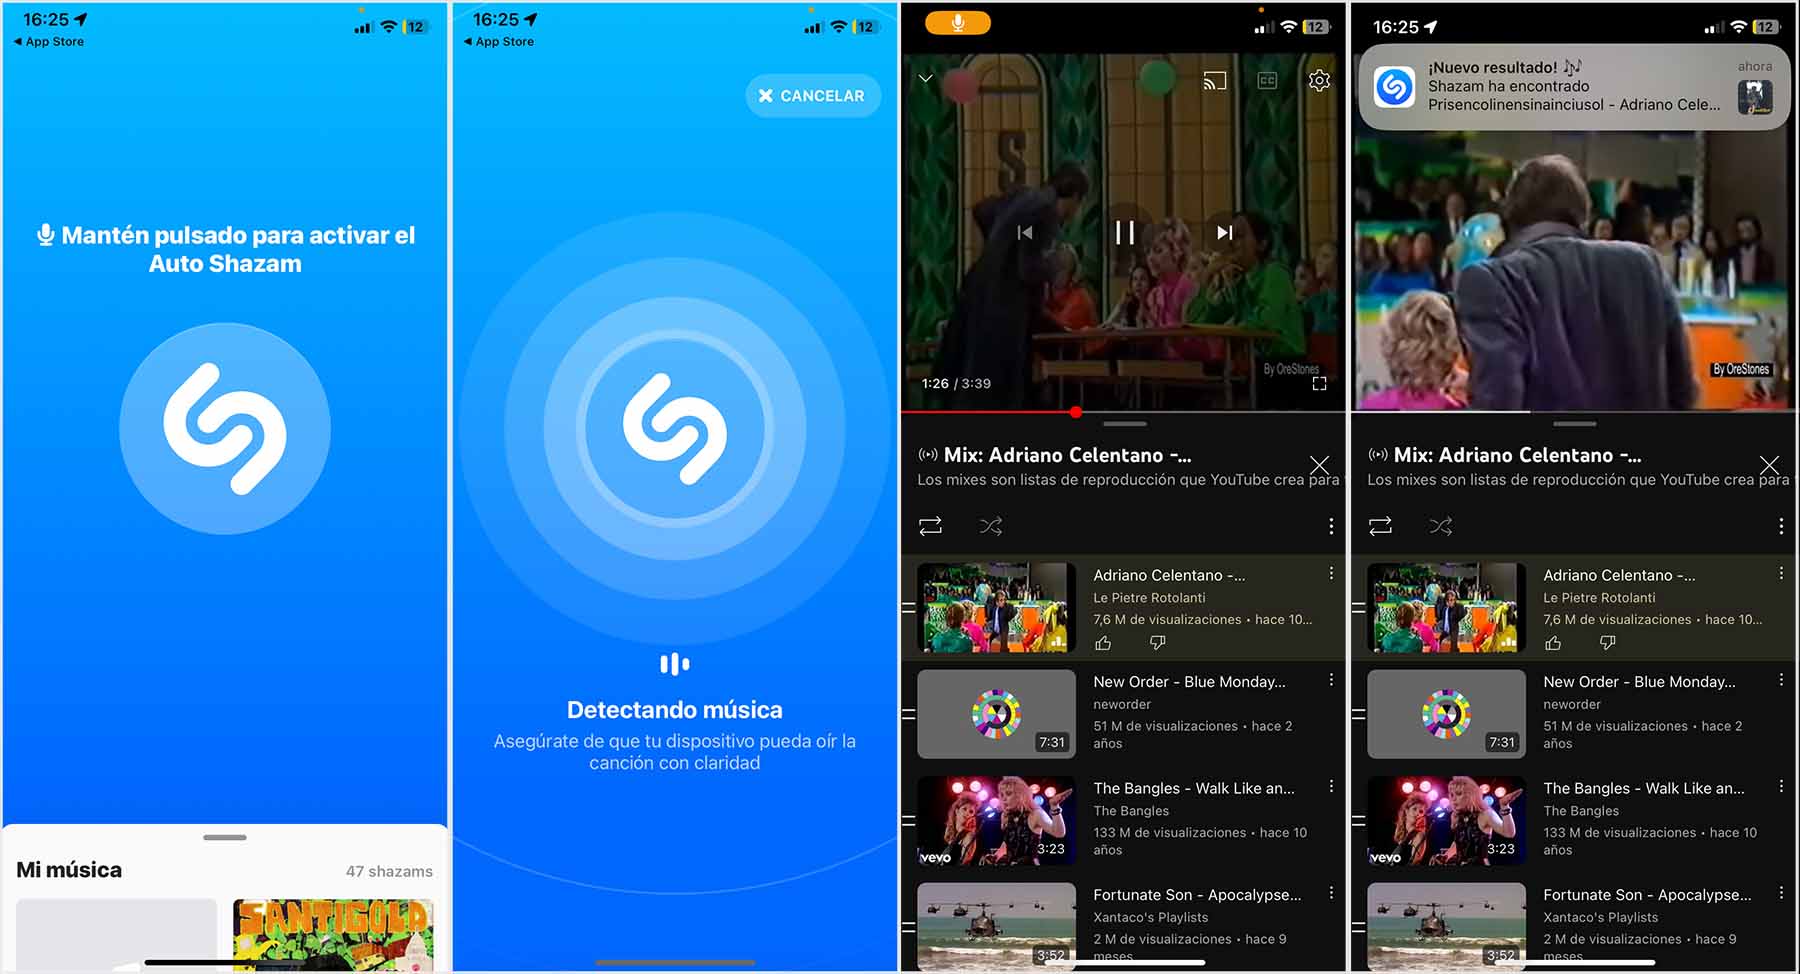 Shazam for iOS now recognizes content played on mobile